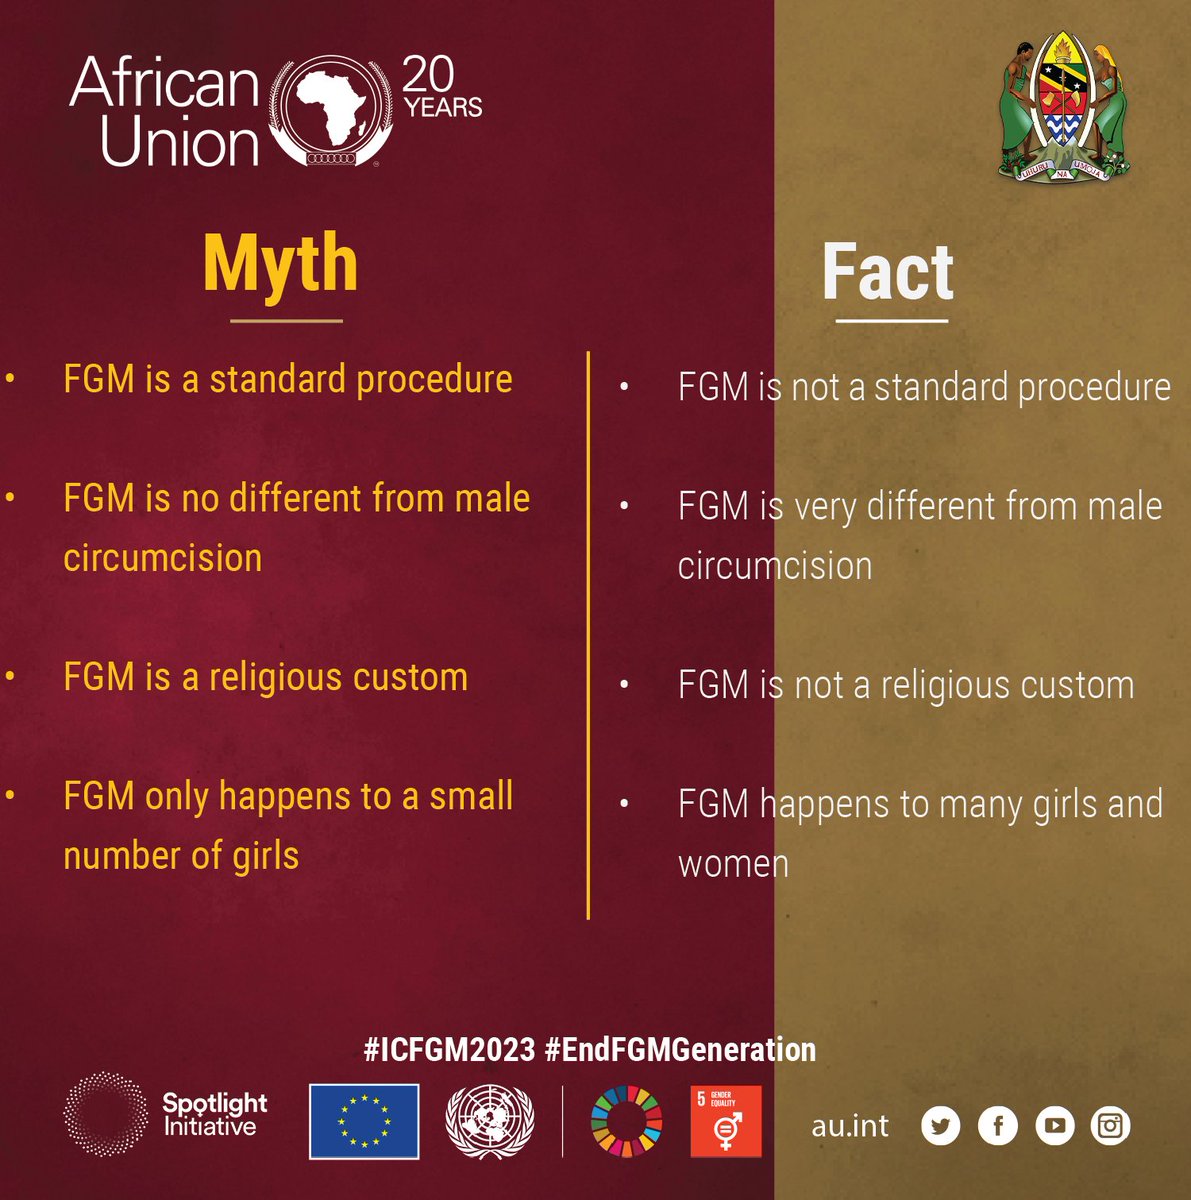 Did you know FGM is not a religious practice? #ICFGM2023 #EndFGM #EndFGMGeneration